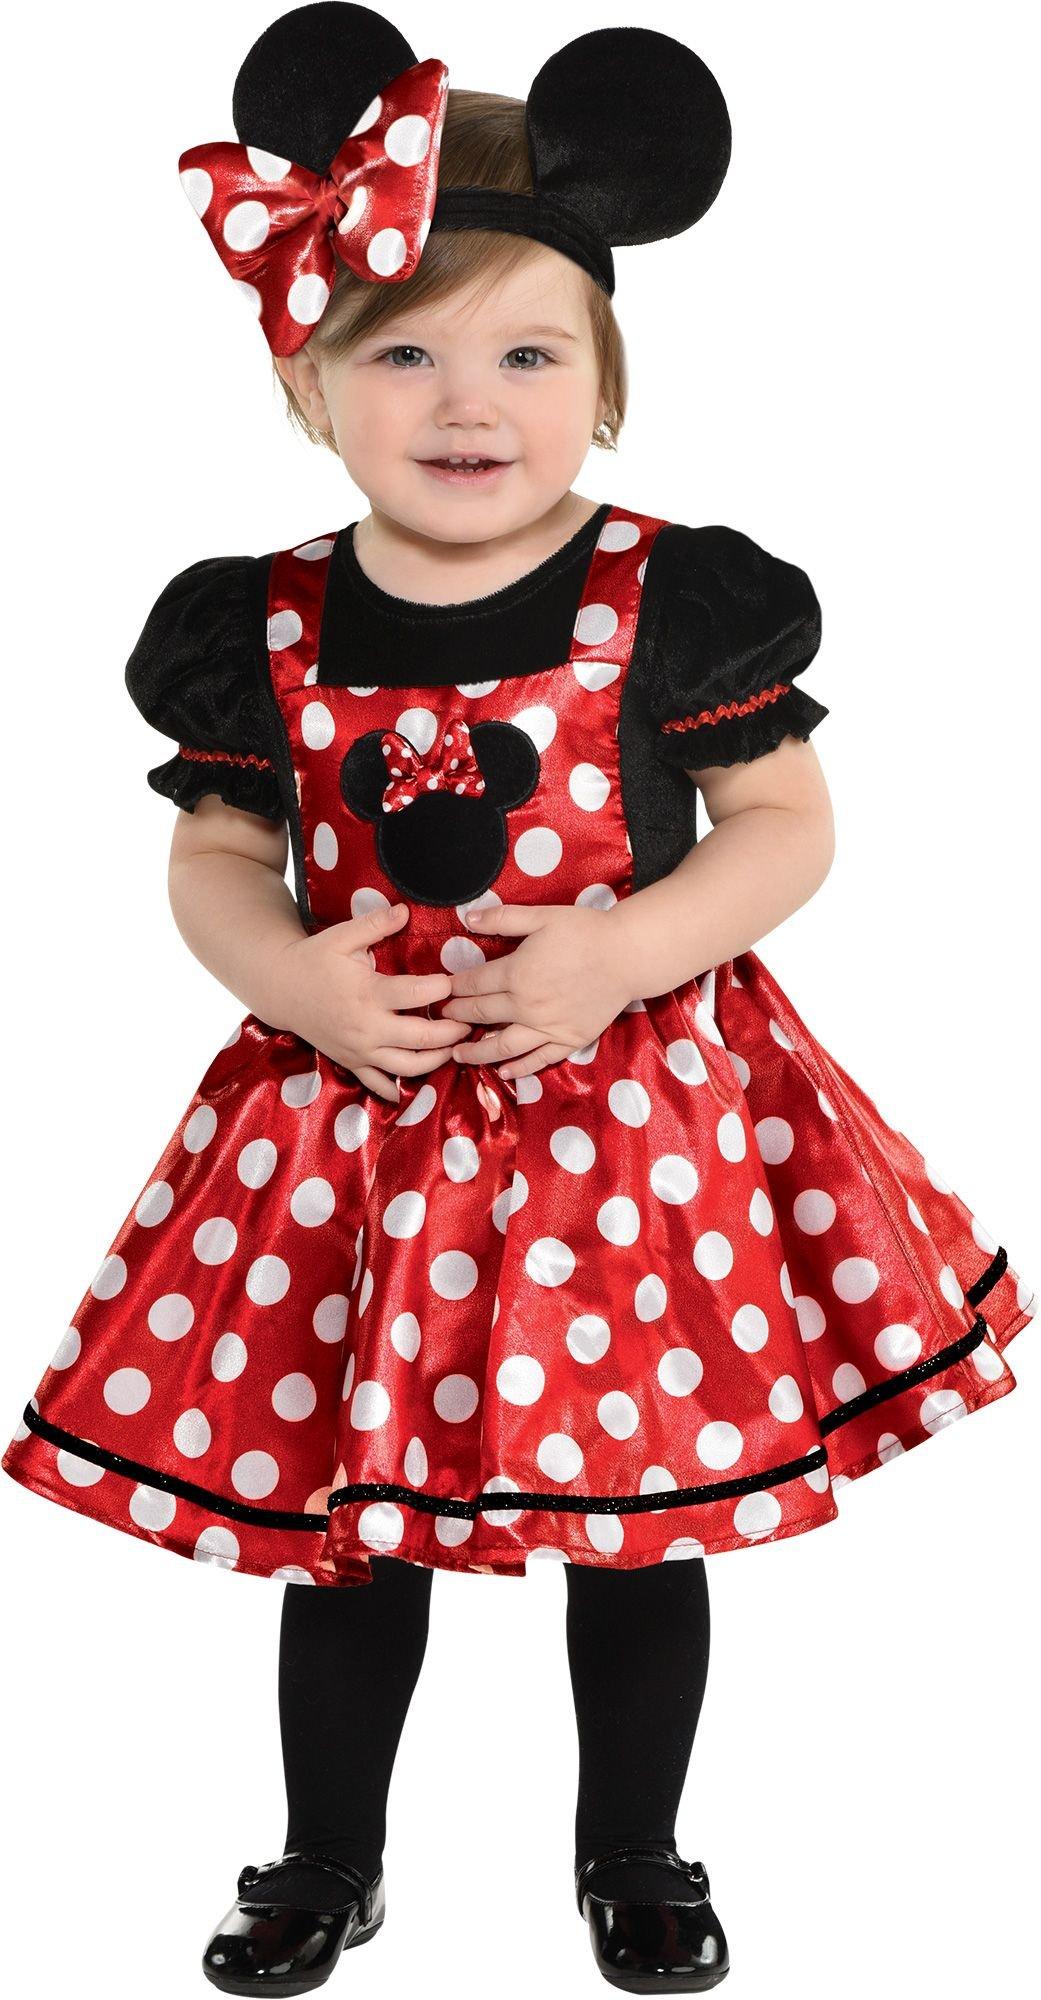 Minnie Mouse Dress, Minnie Mouse Costume, Minnie Mouse Birthday Outfit ...